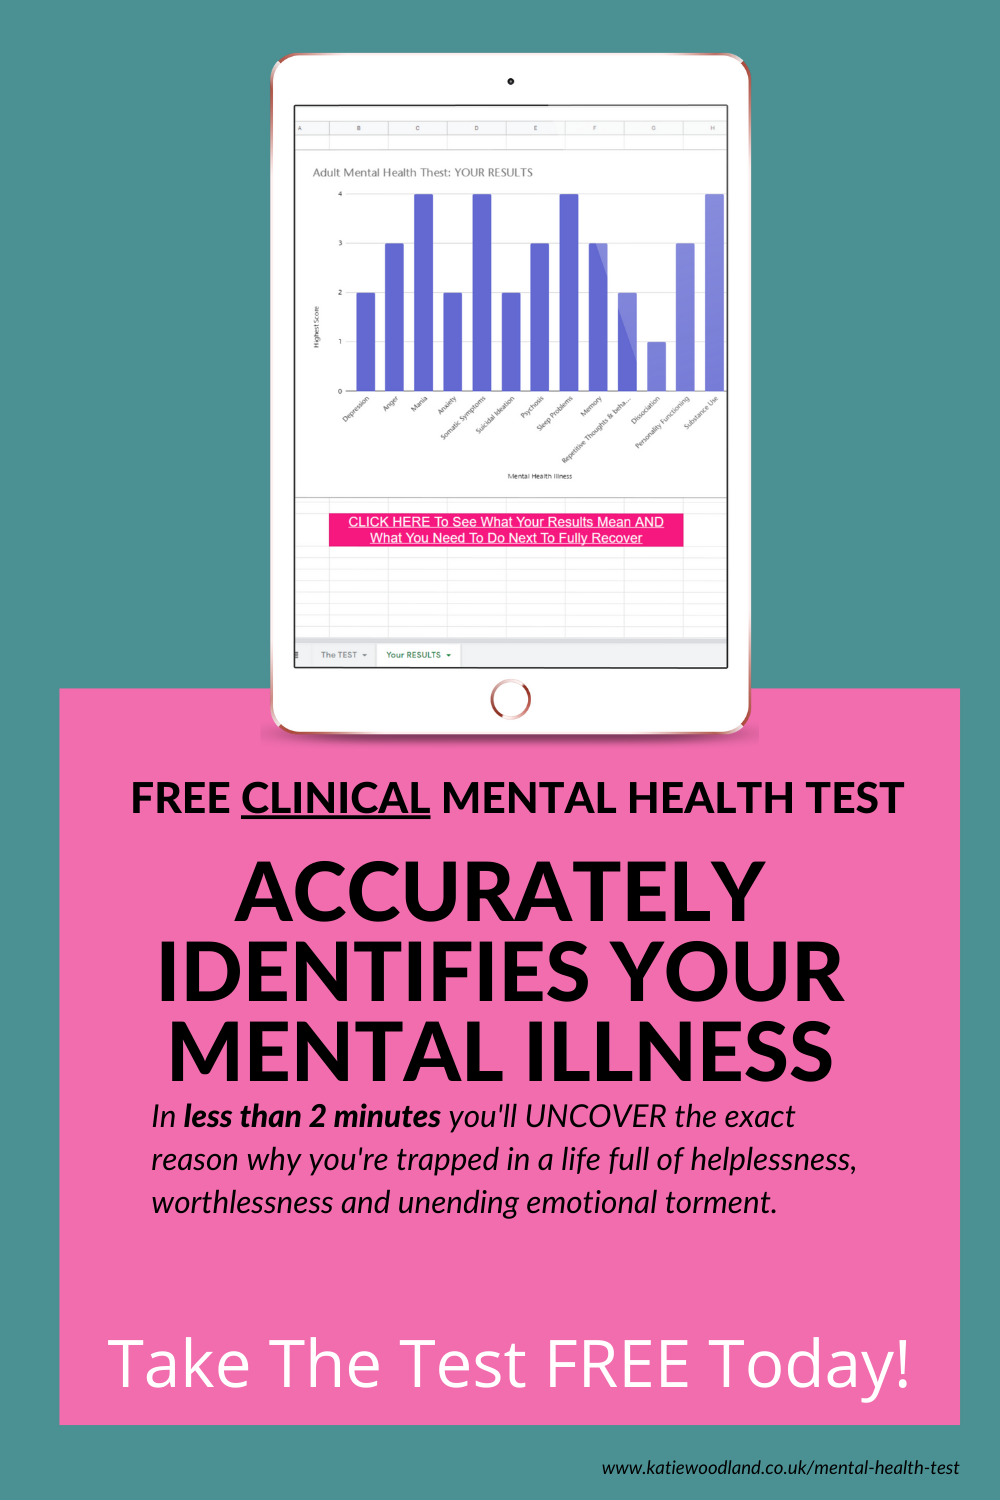 FREE Clinical Mental Health Test Accurately Identifies Your Mental Illness In Under 2 Minutes!